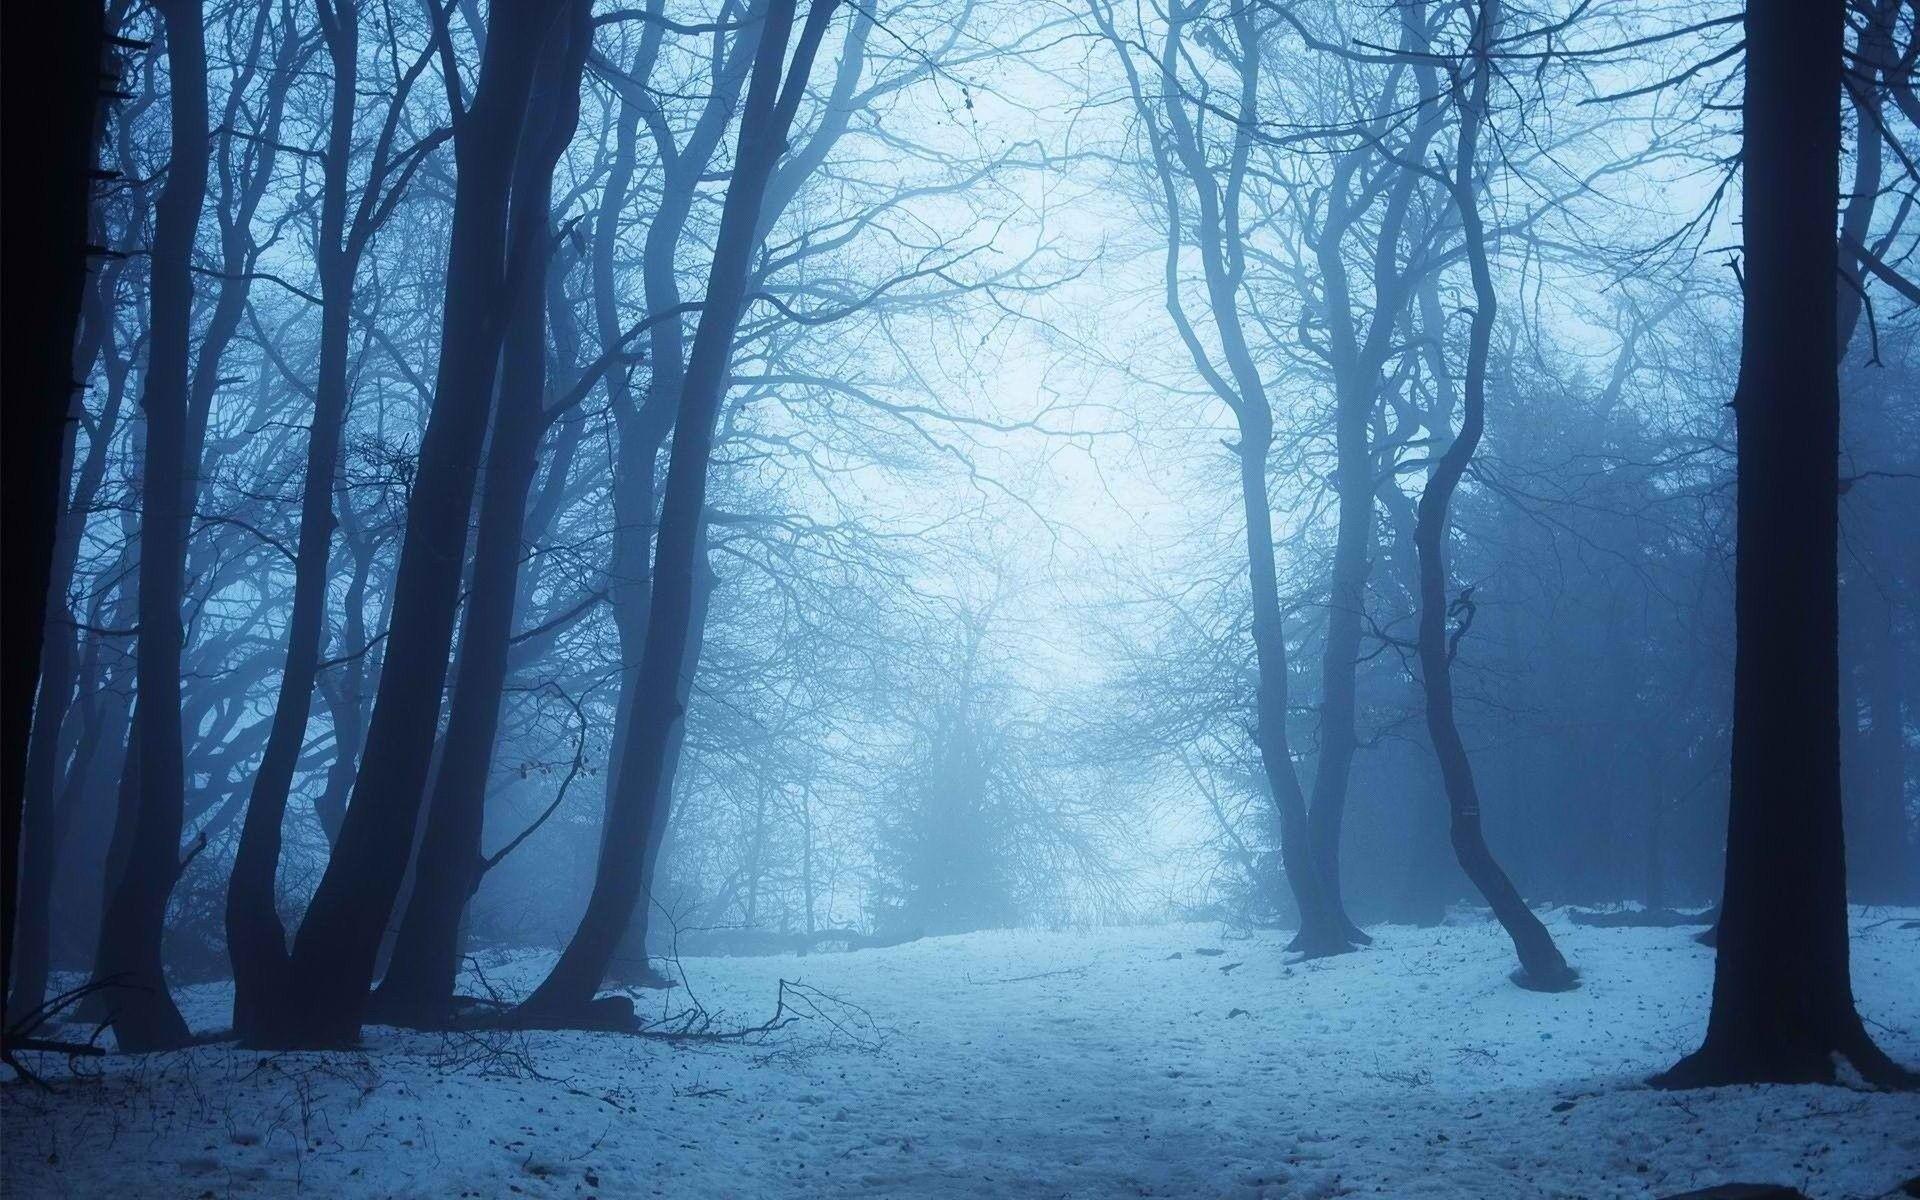 Trees: Nature Blue Forest Earth Winter Trees HD Photo For Mobile